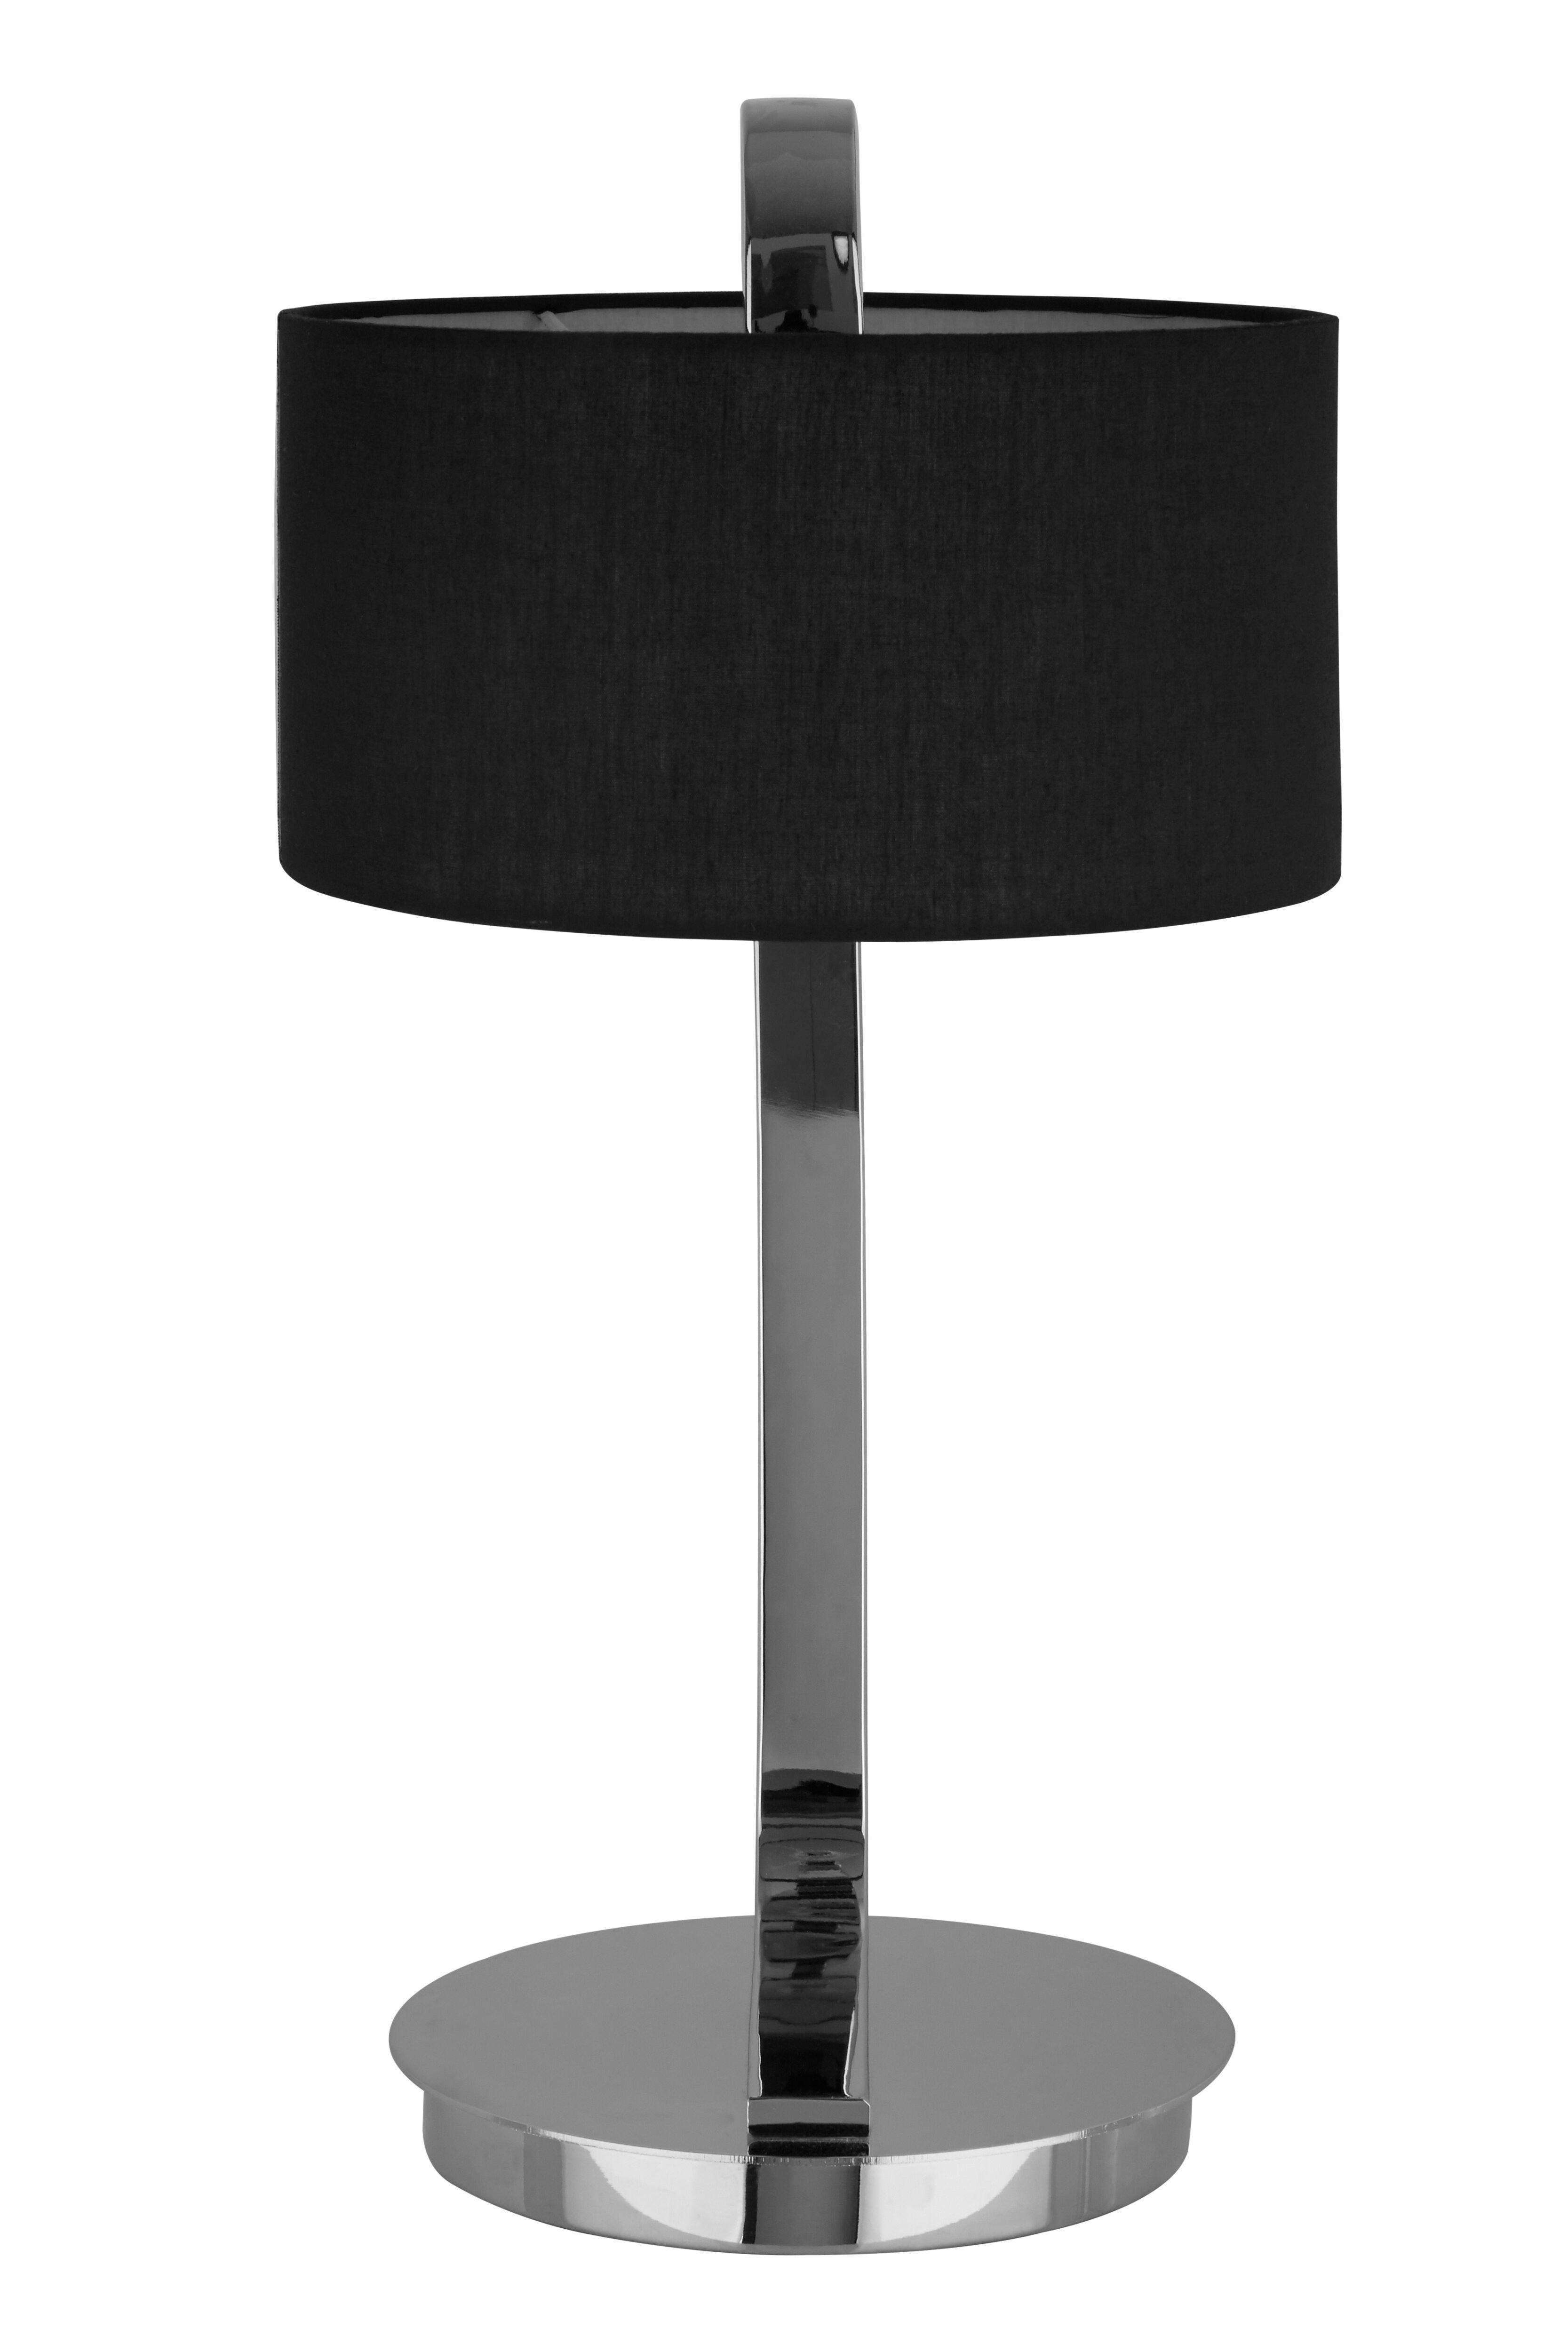 Interiors by Premier Leyna Table Lamp with EU Plug